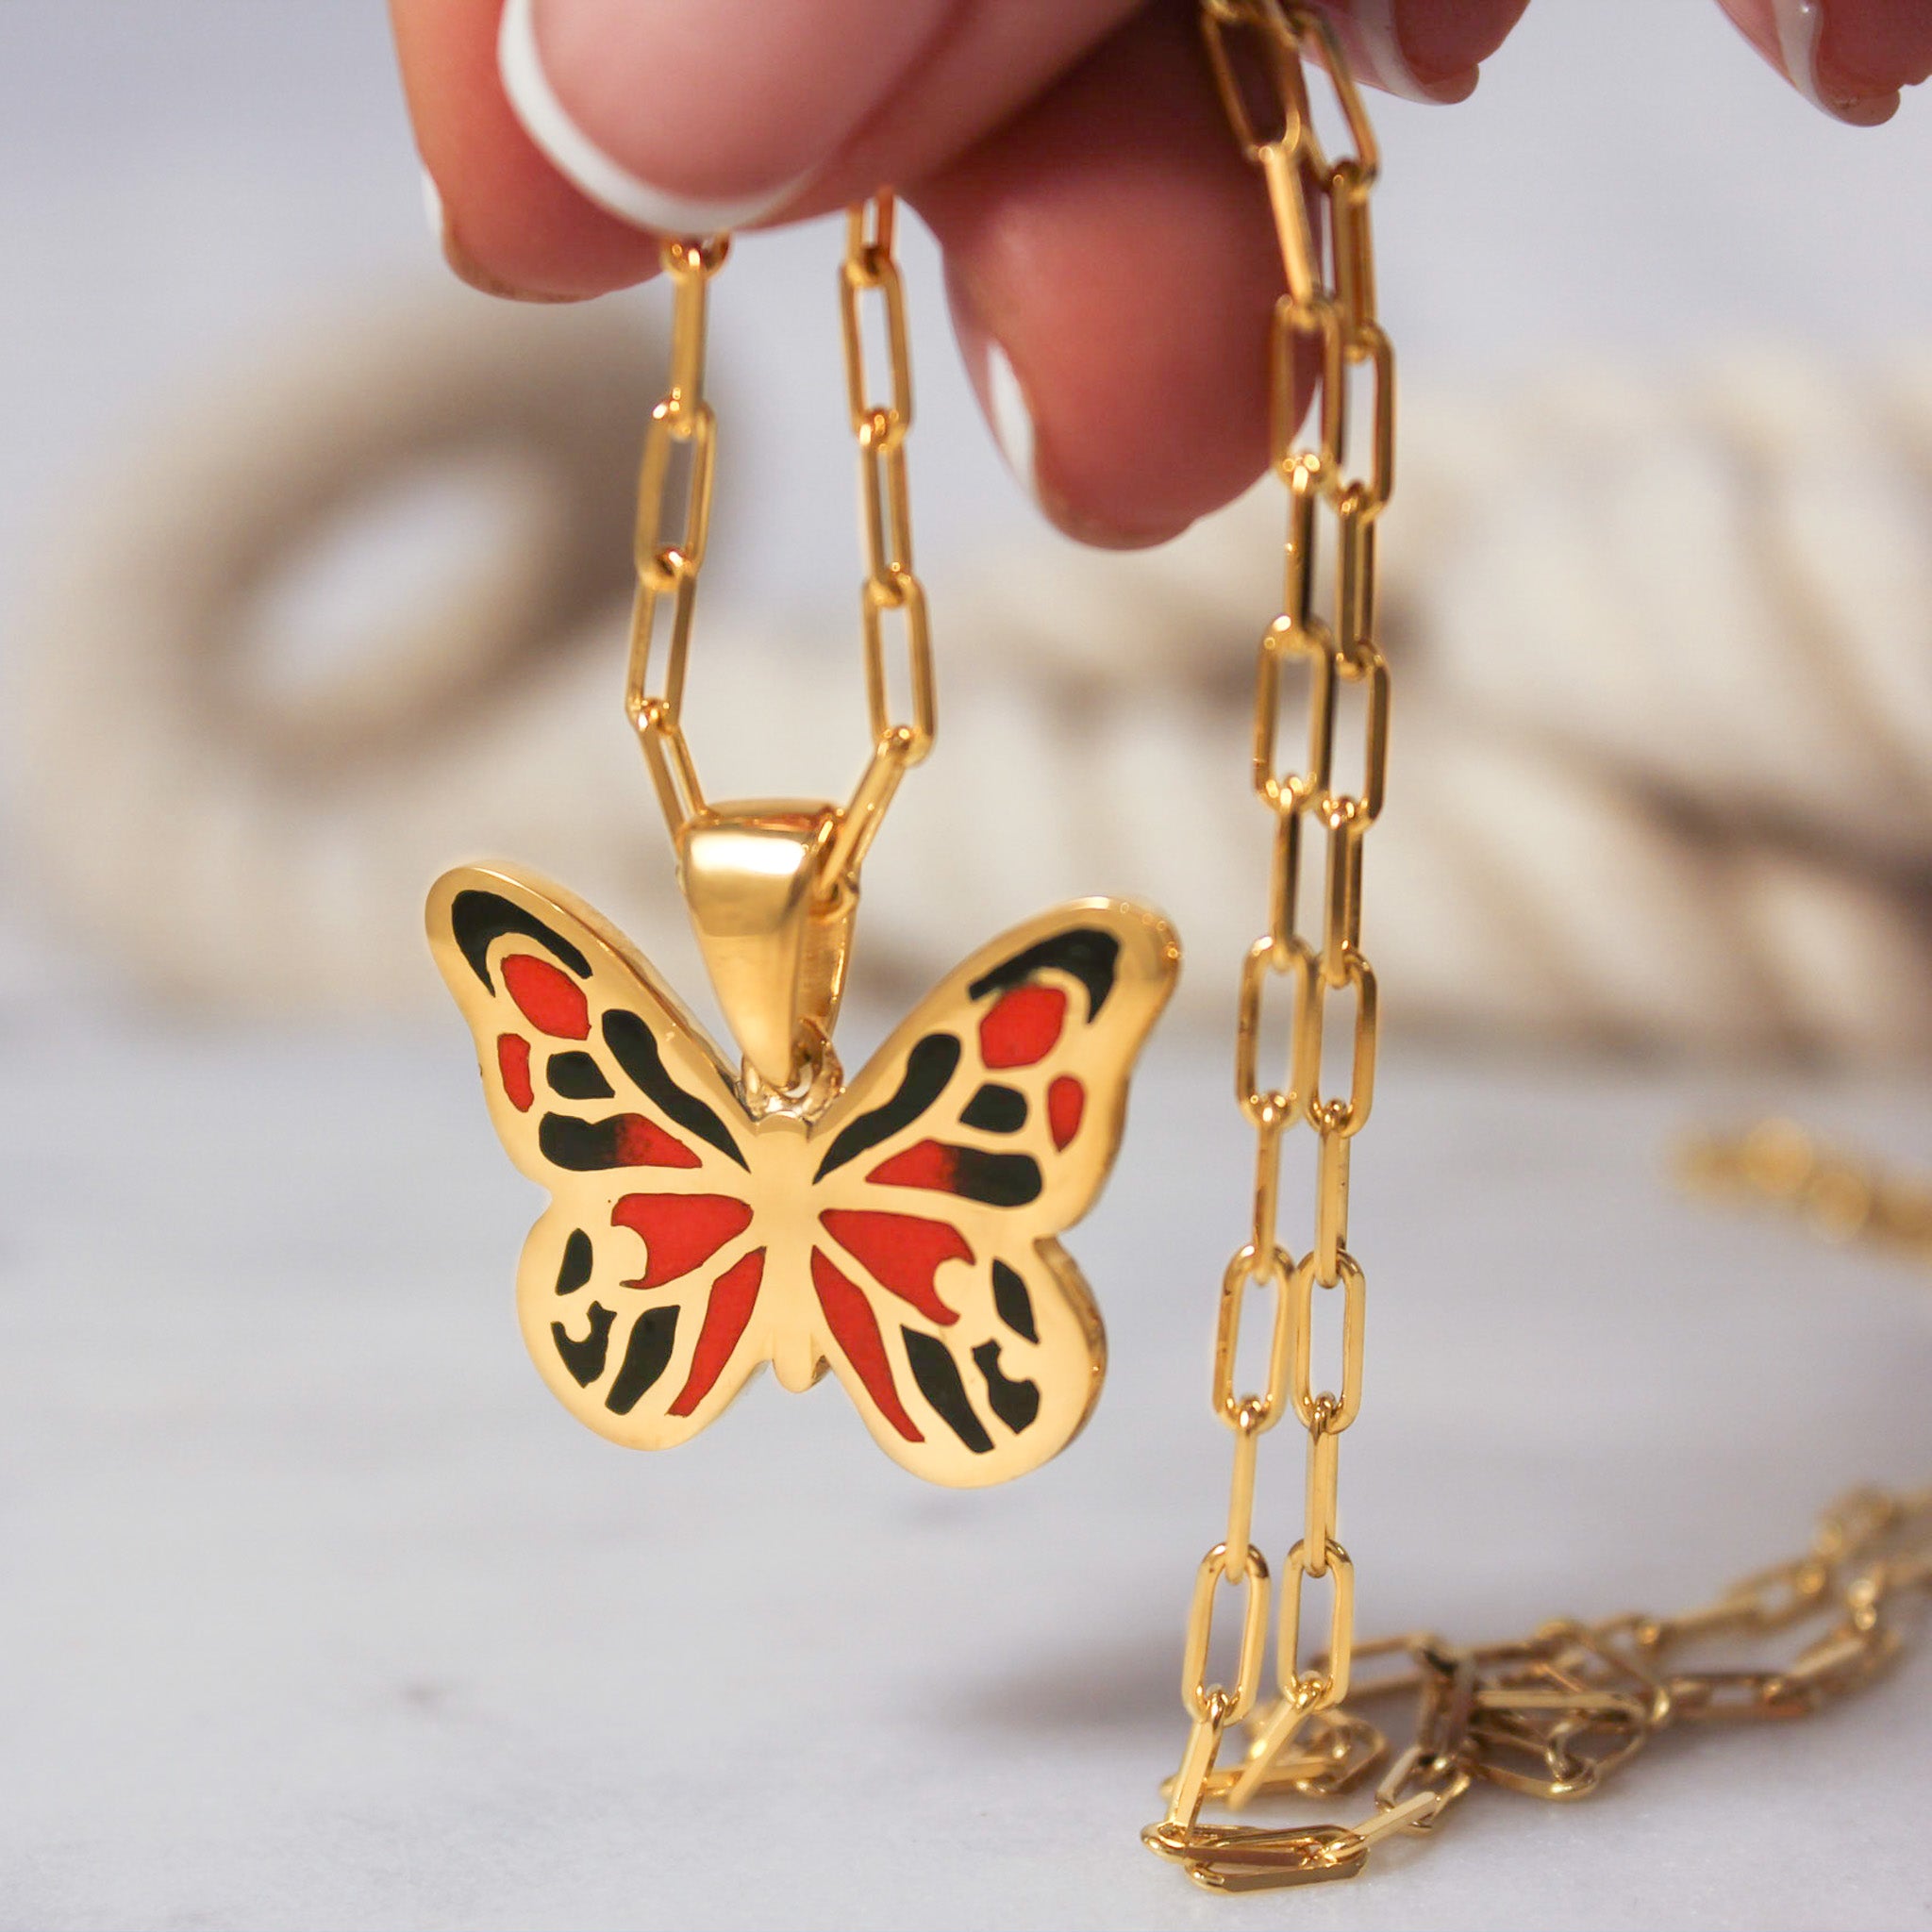 Artistic shot of the butterfly pendant against a neutral background, showcasing its stunning colors and design.